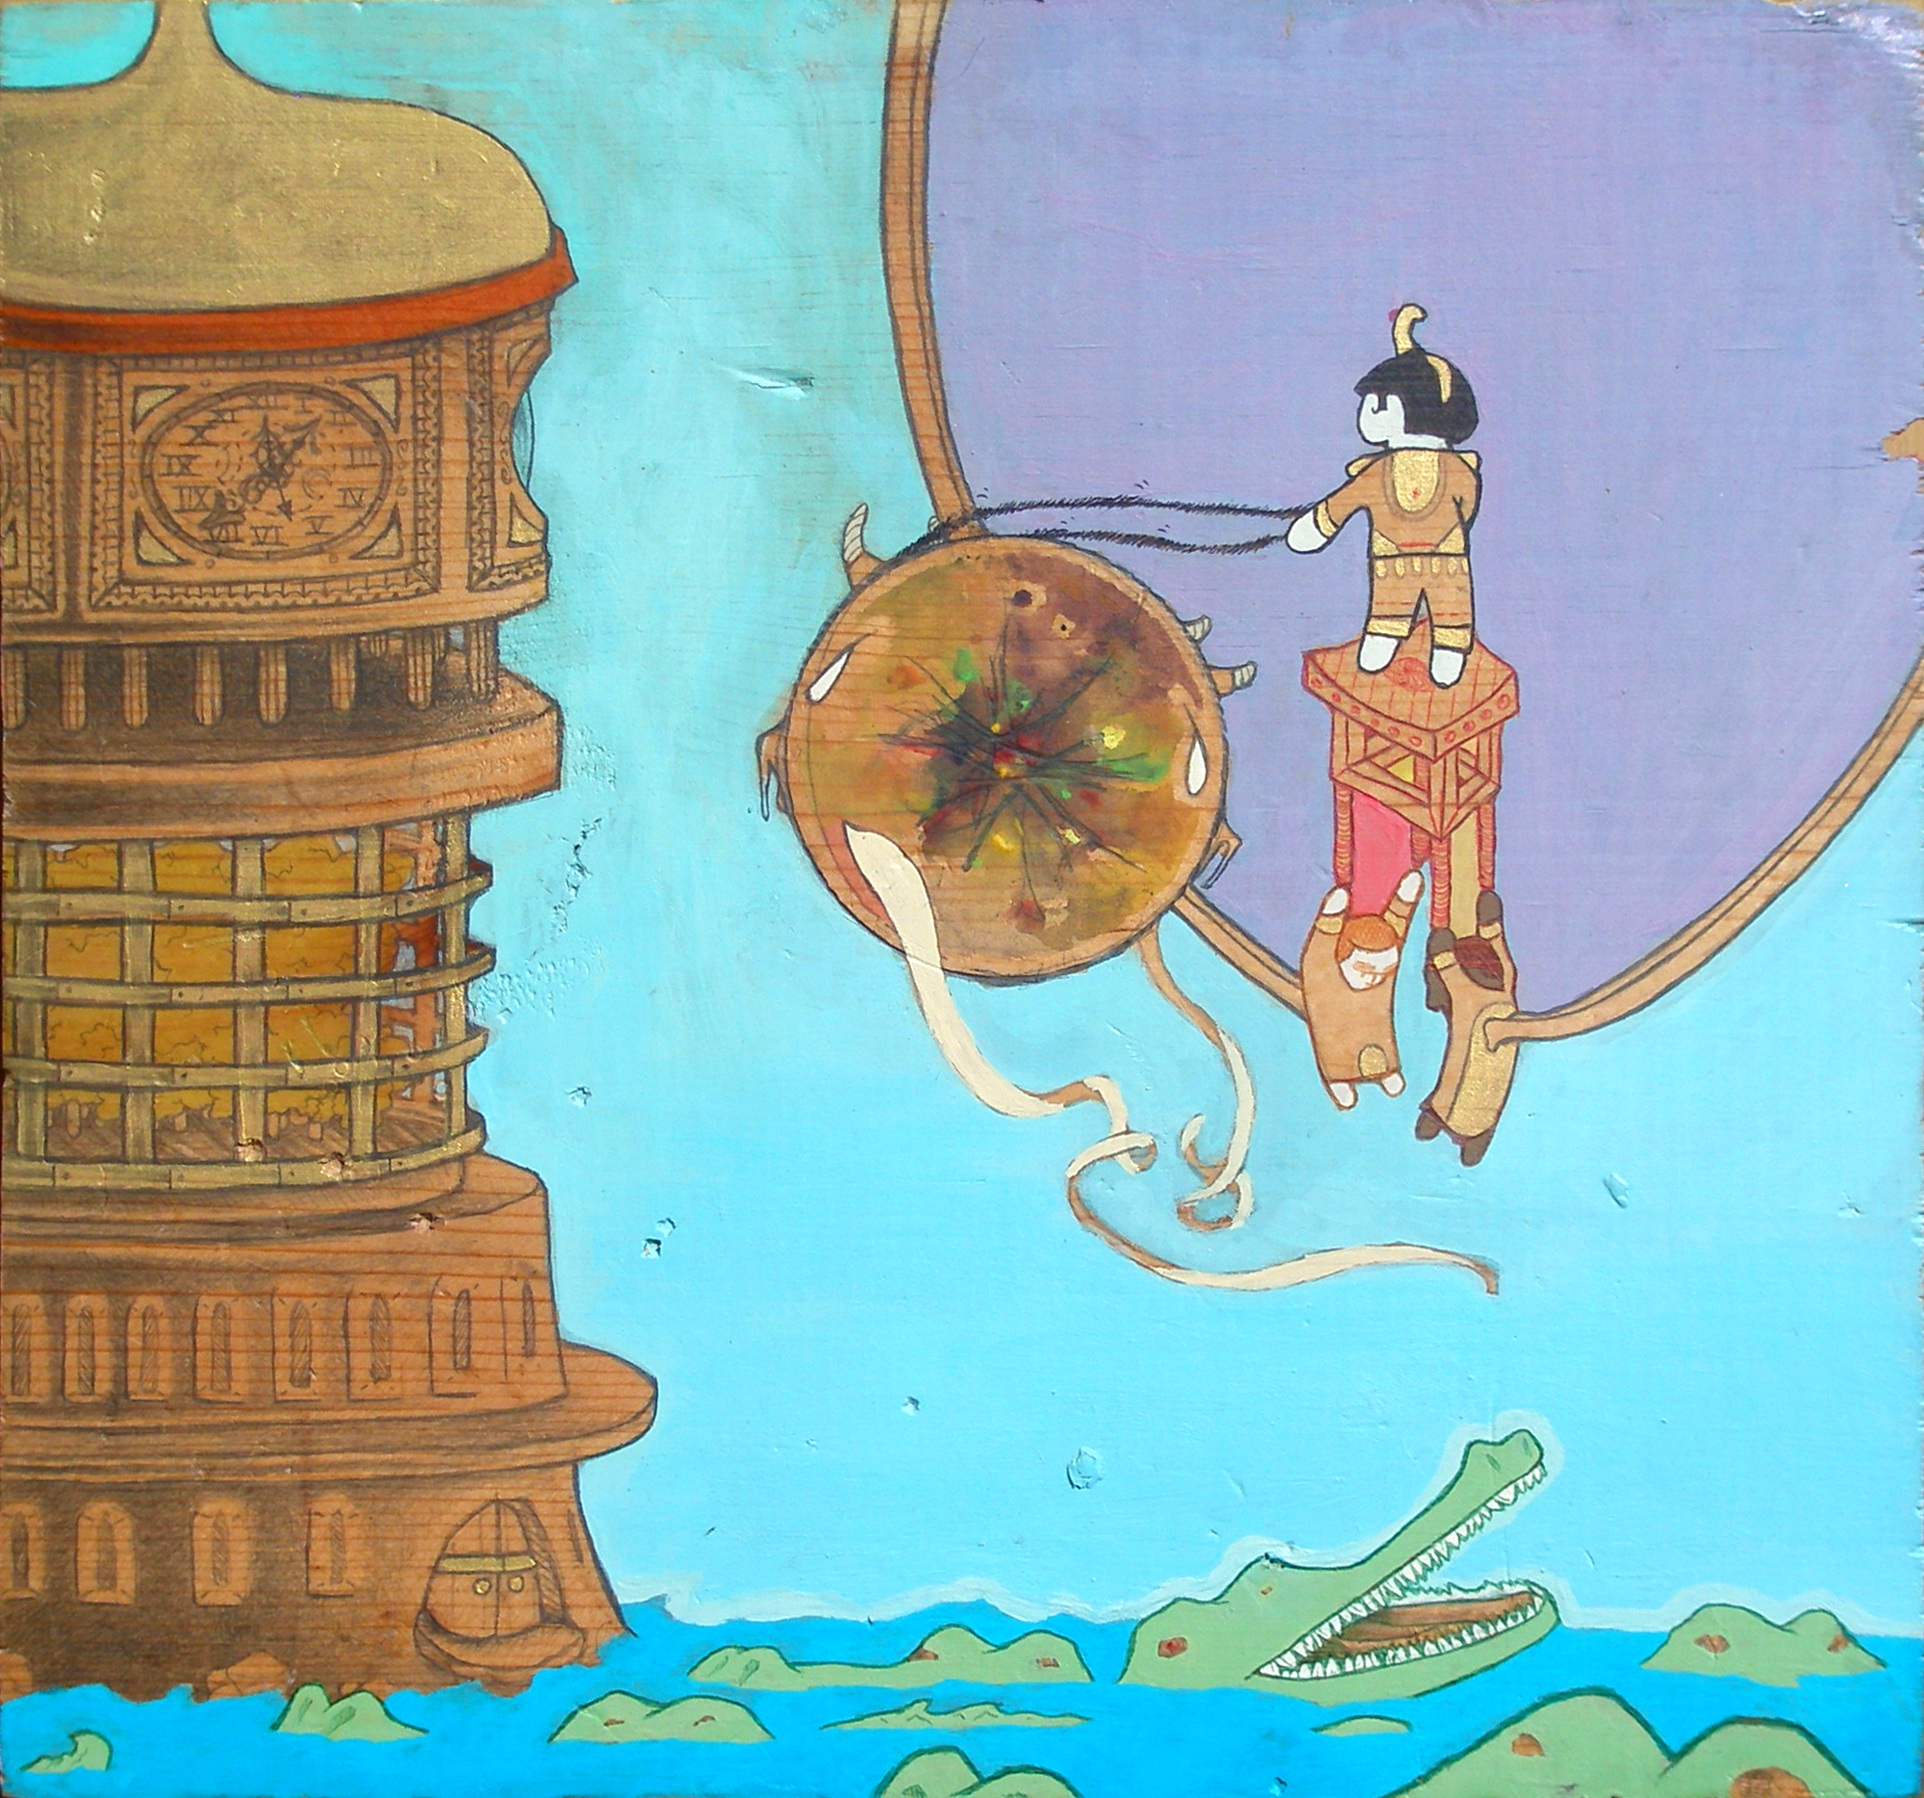   Homecoming  gouache on wood. 2013   sold to private collector  